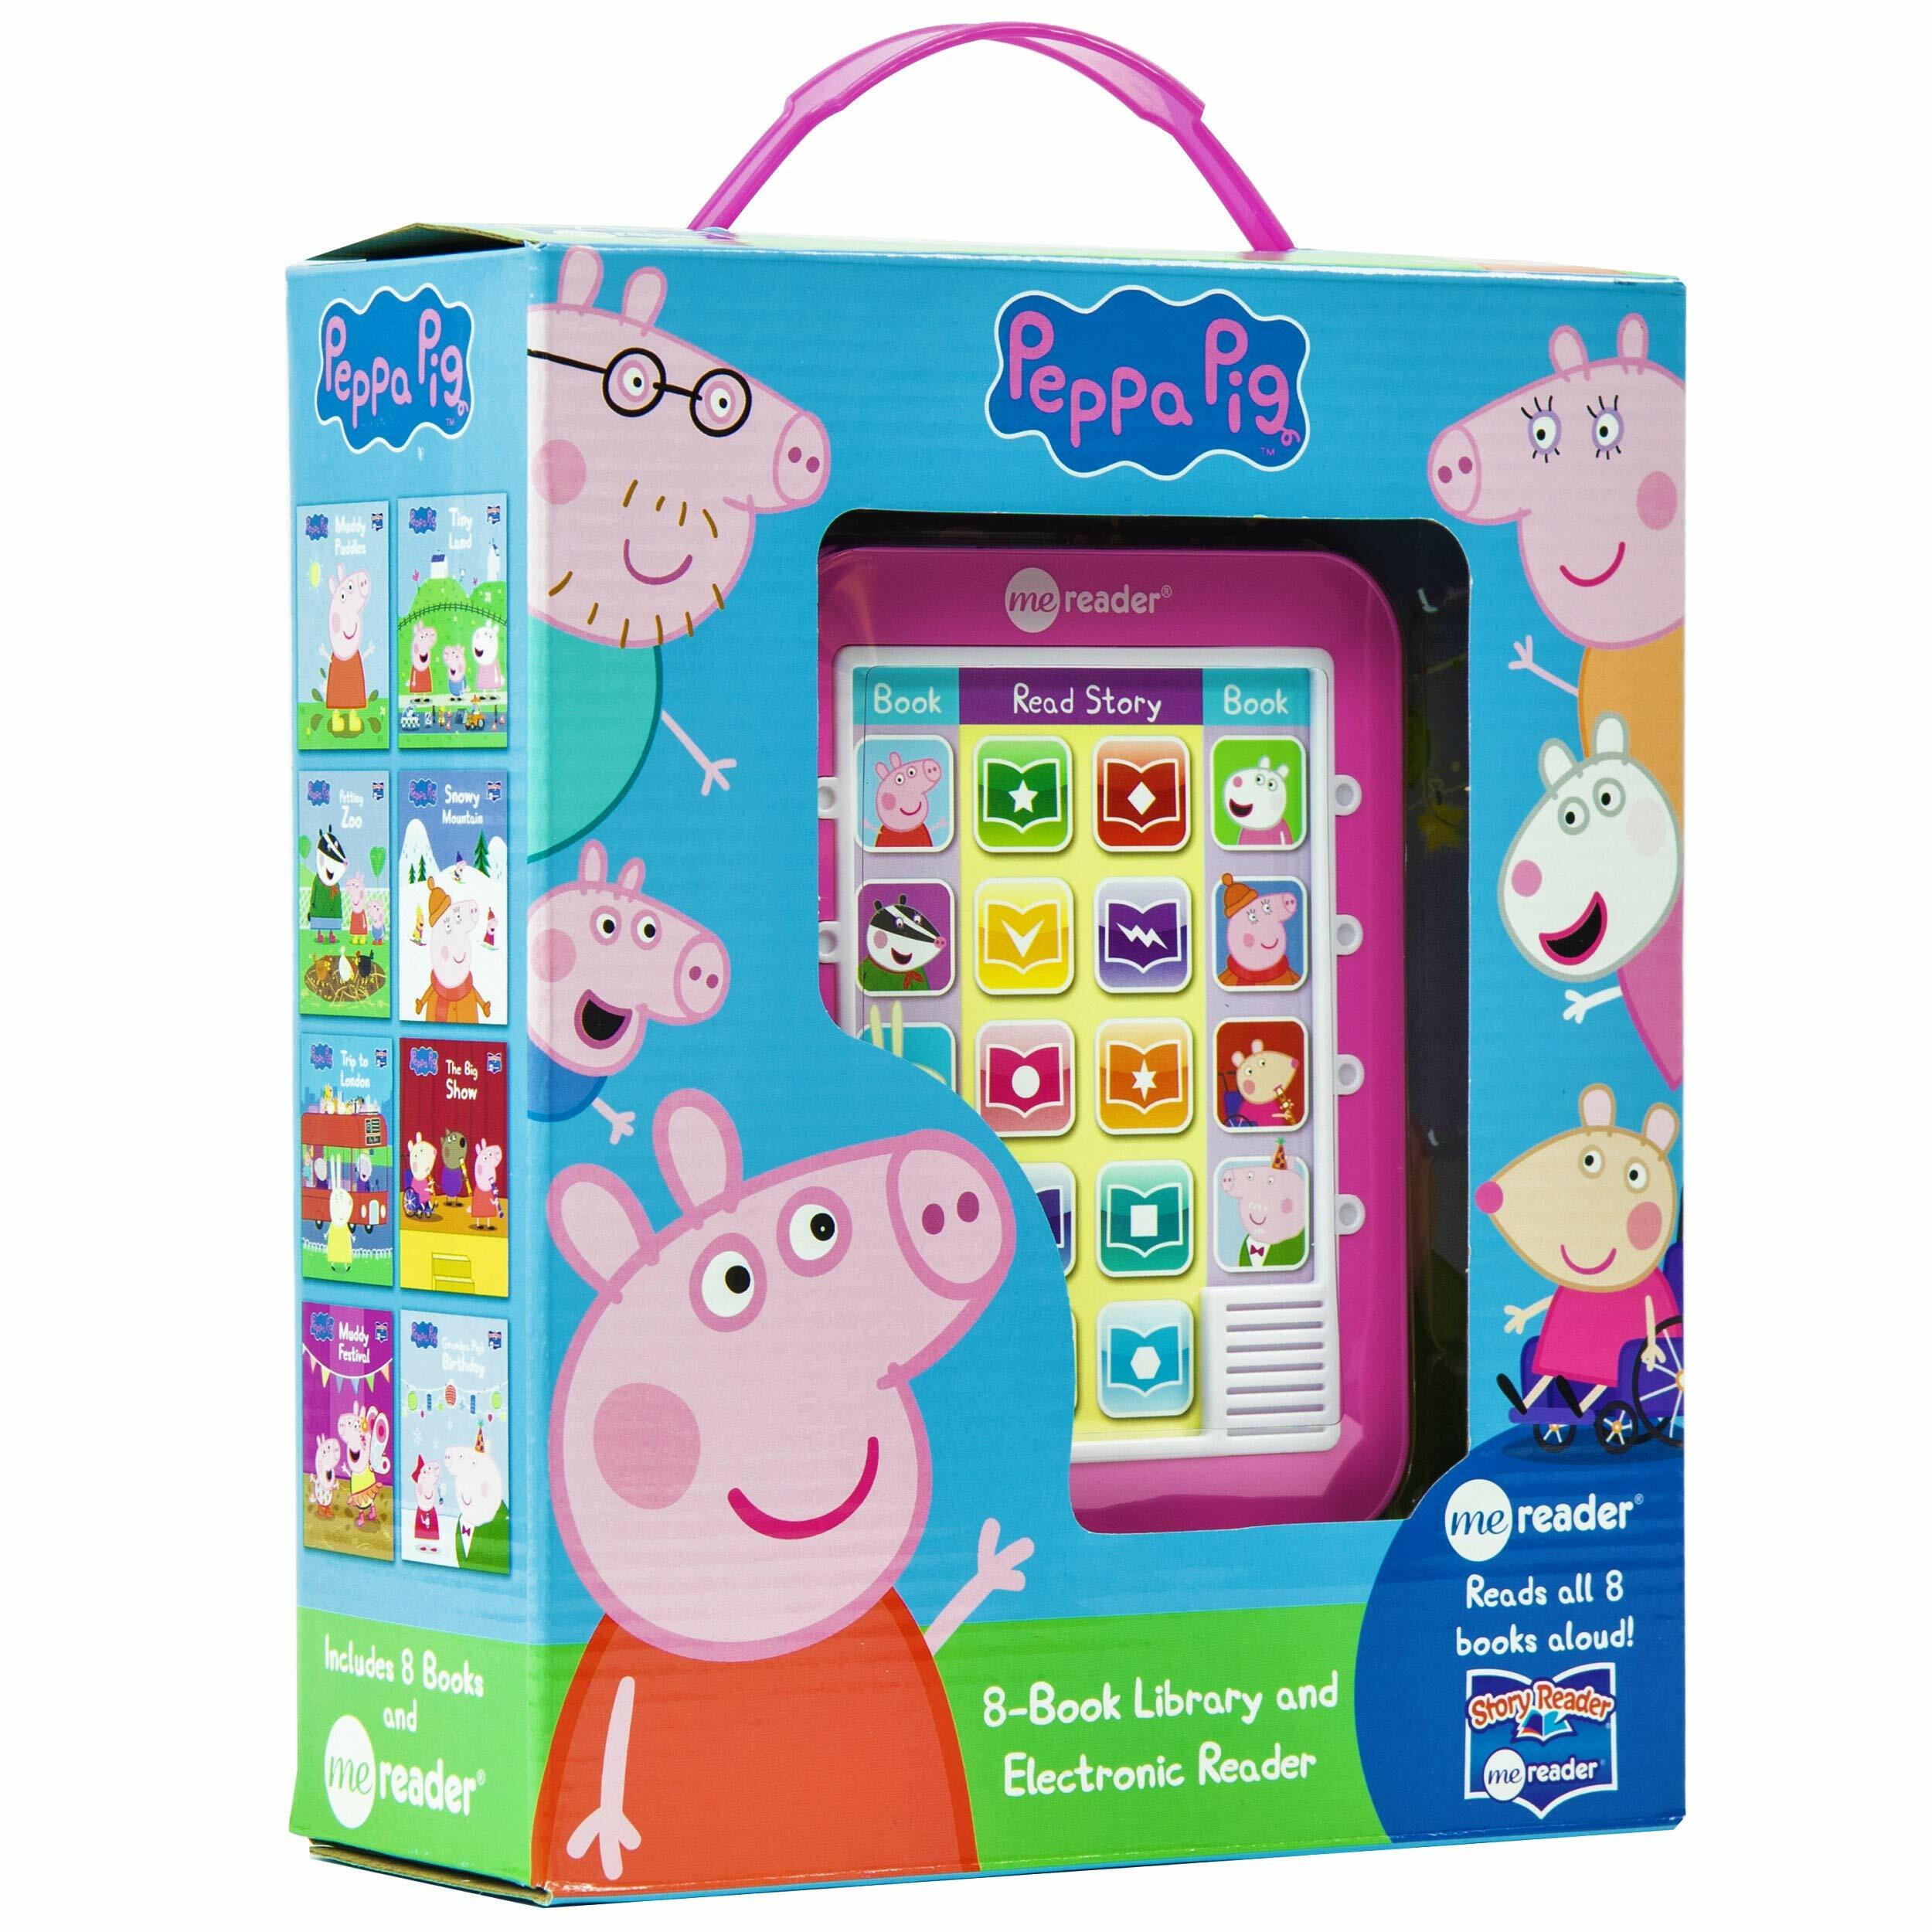 Peppa Pig: Me Reader 8-Book Library and Electronic Reader Sound Book Set [With Electronic Reader] (Hardcover)